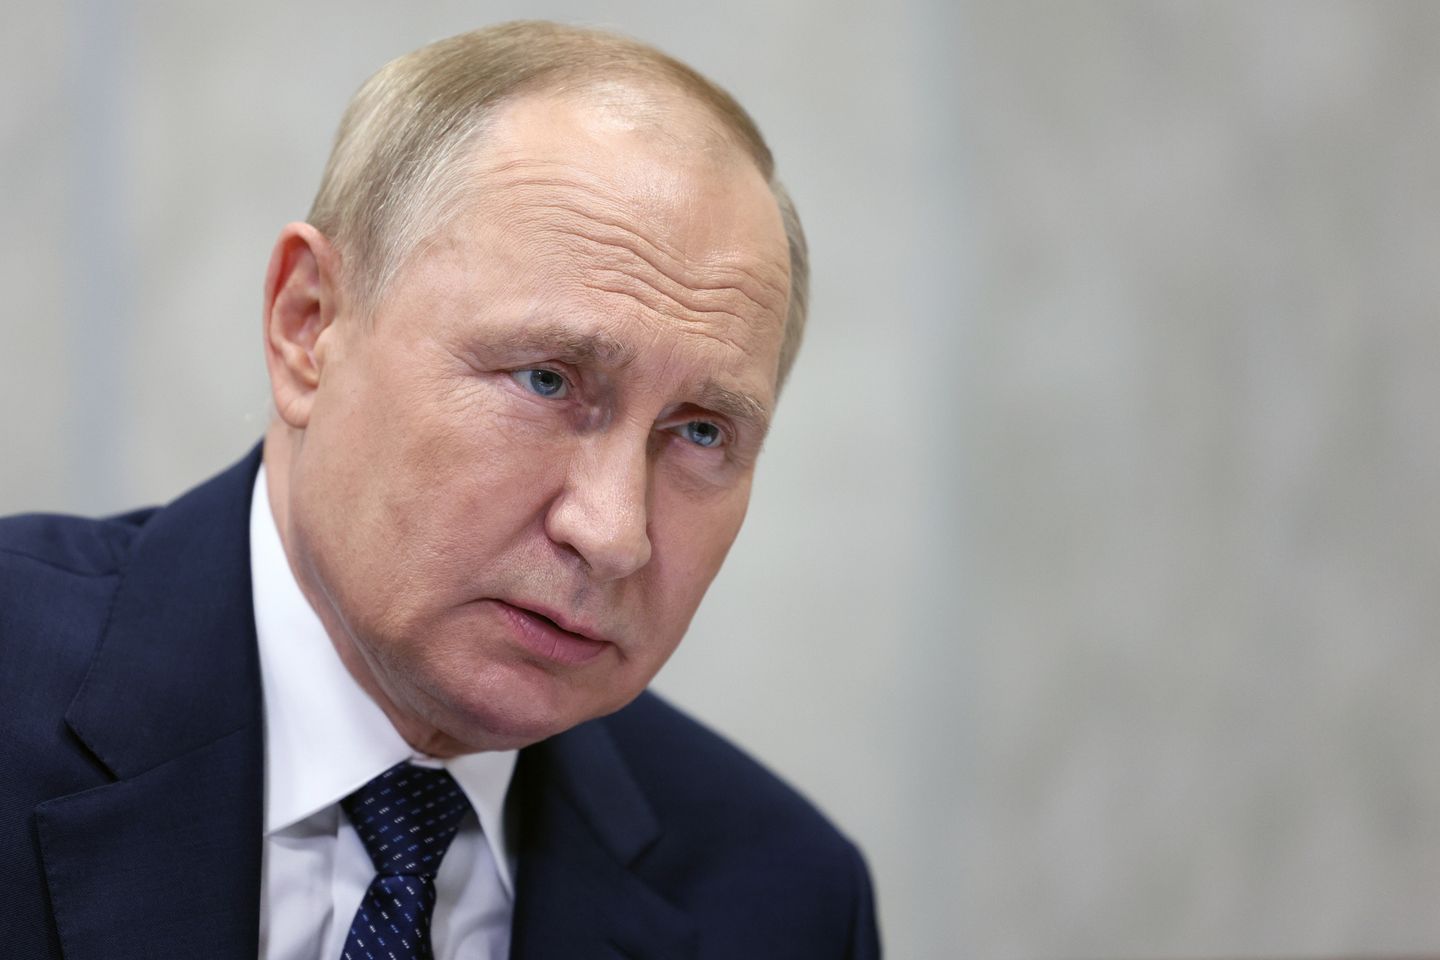 White Property official blasts Putin's 'absurd' escalation as 'act of weakness'